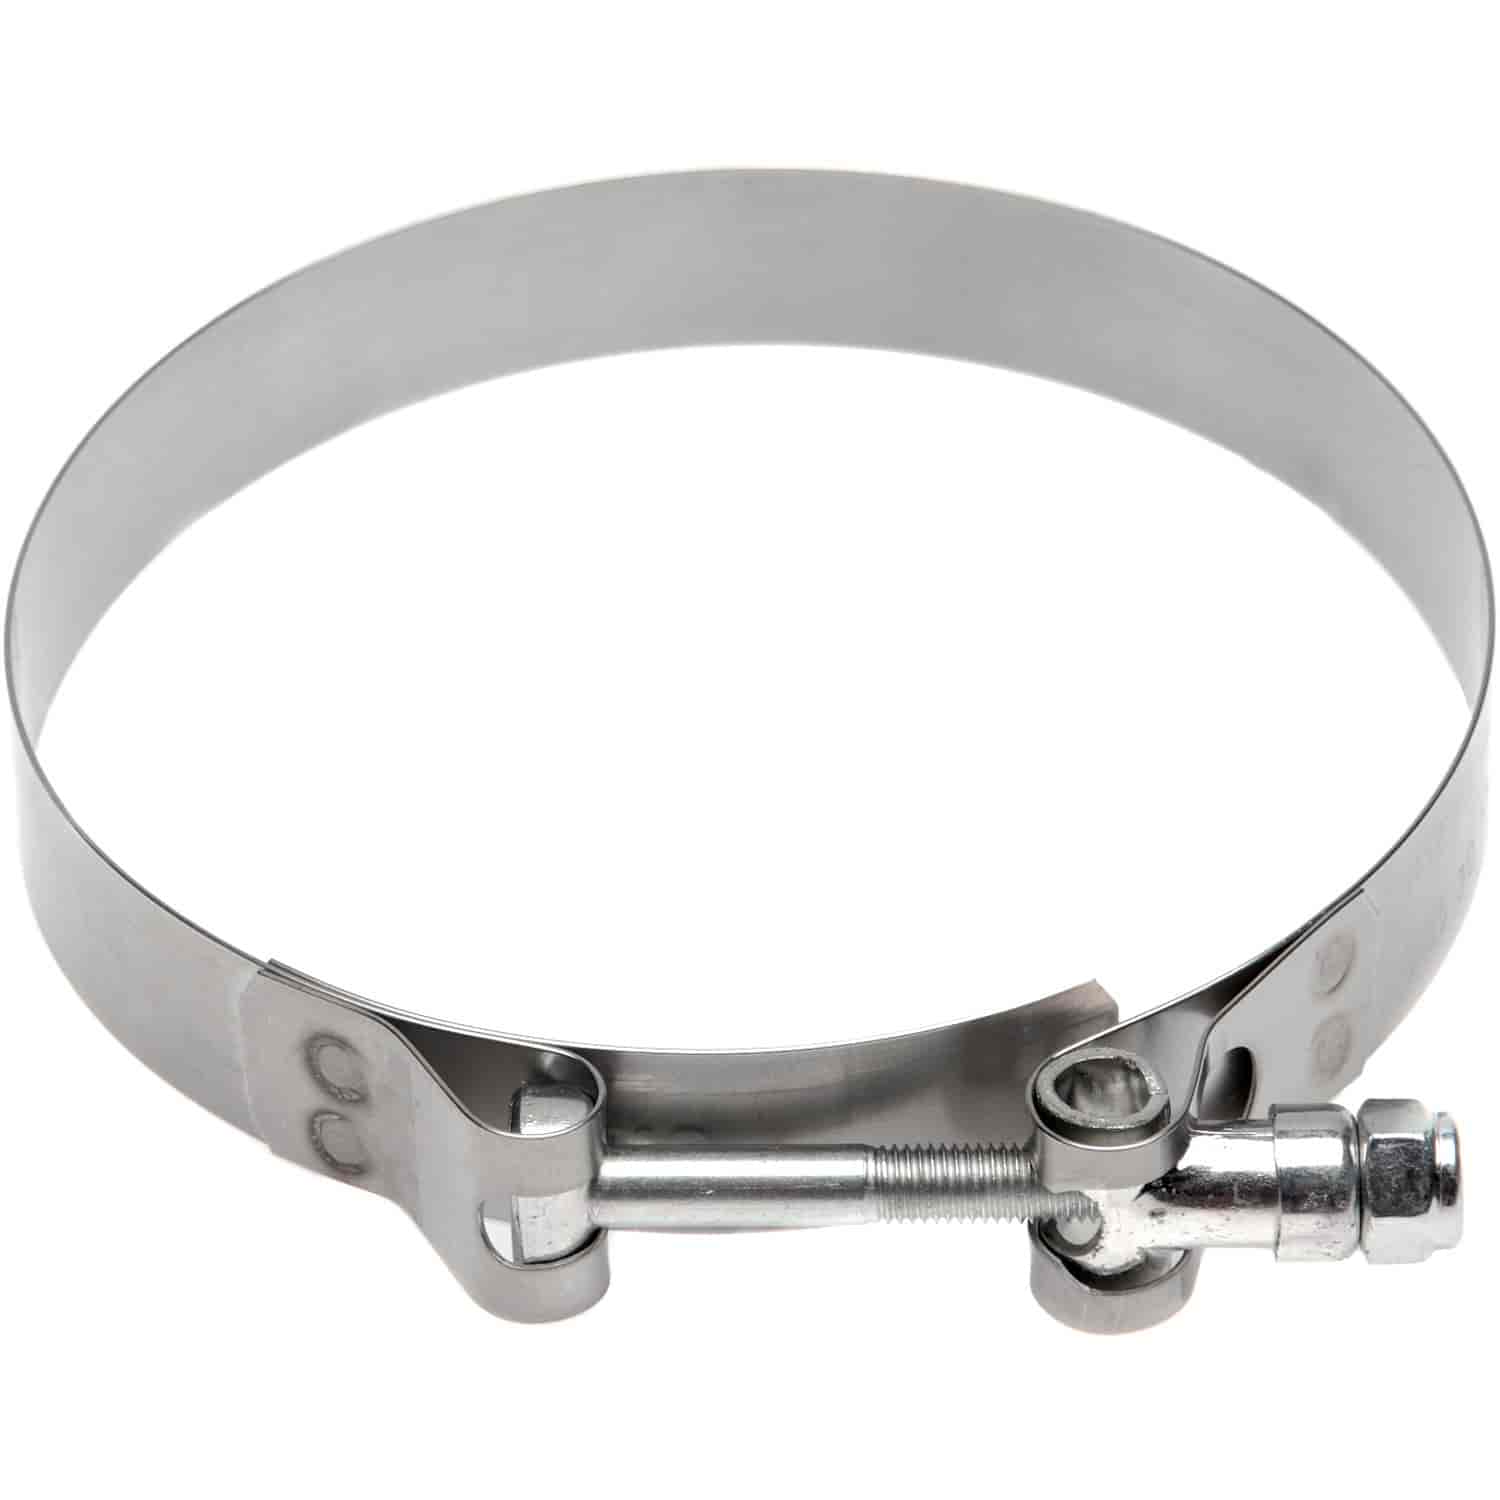 T-Bolt Hose Clamp [3.688 in. to 3.375 in.